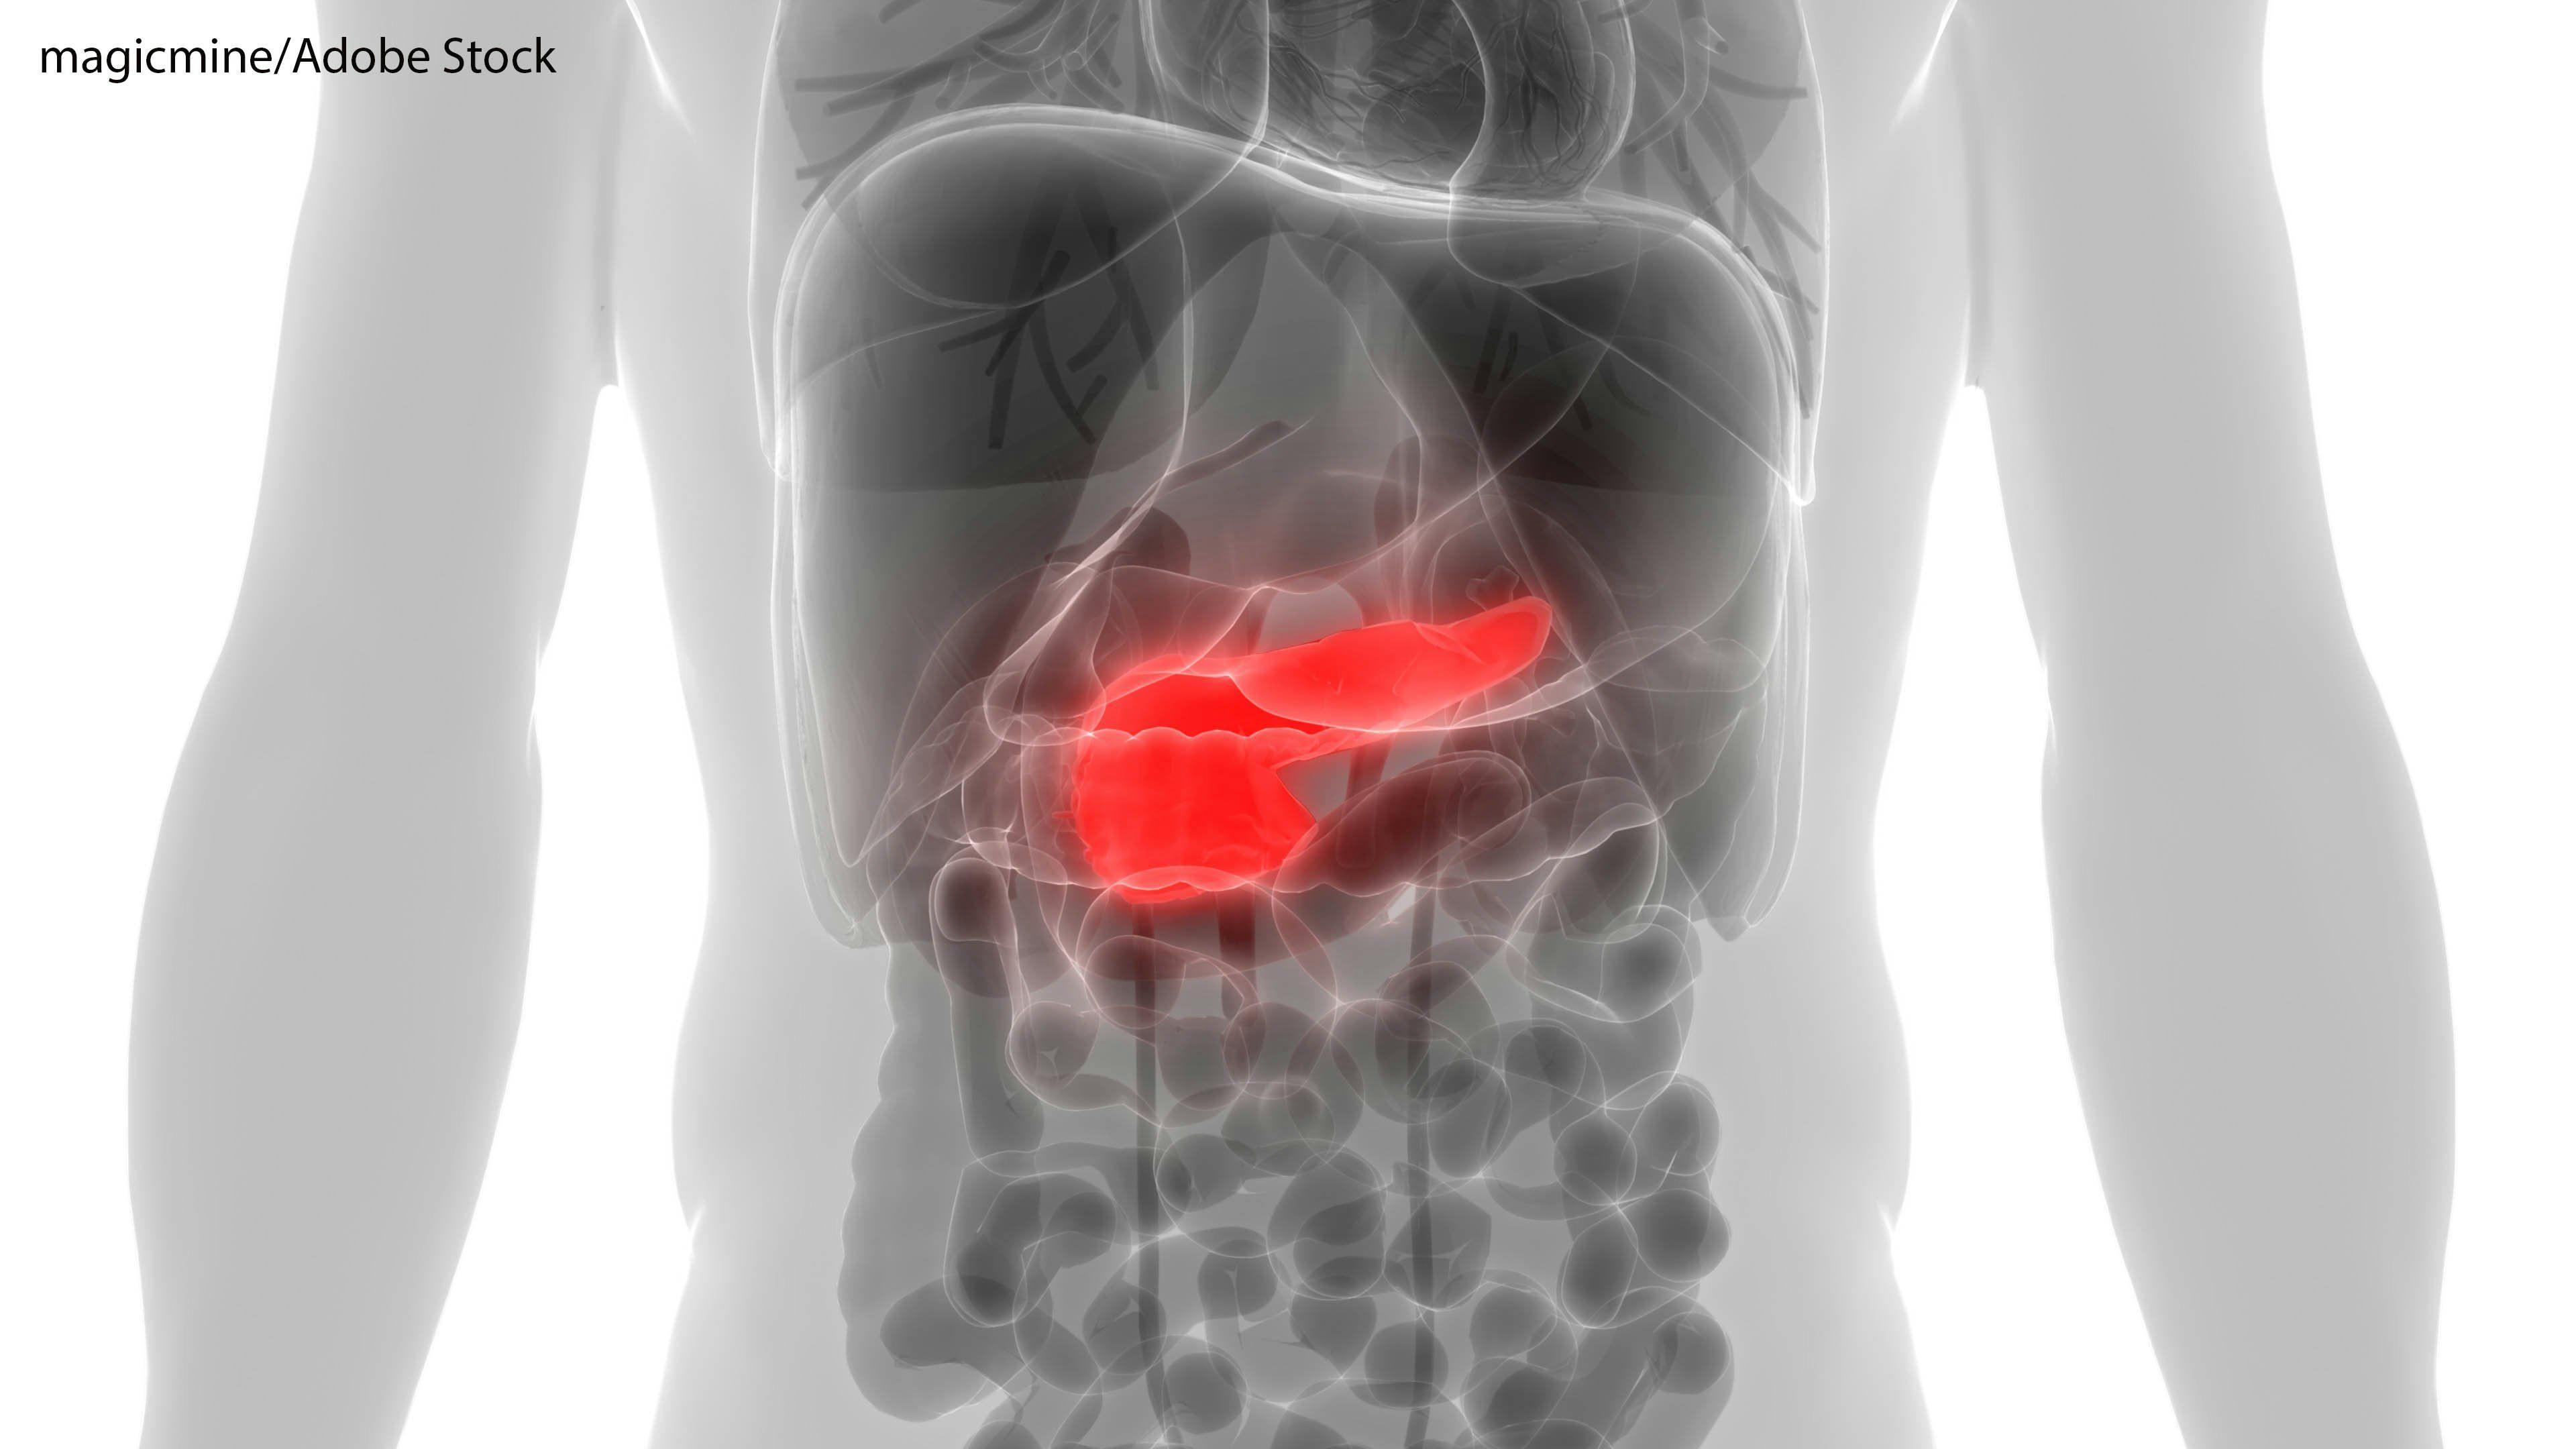 Pancreatic cancer treated as systematic disease